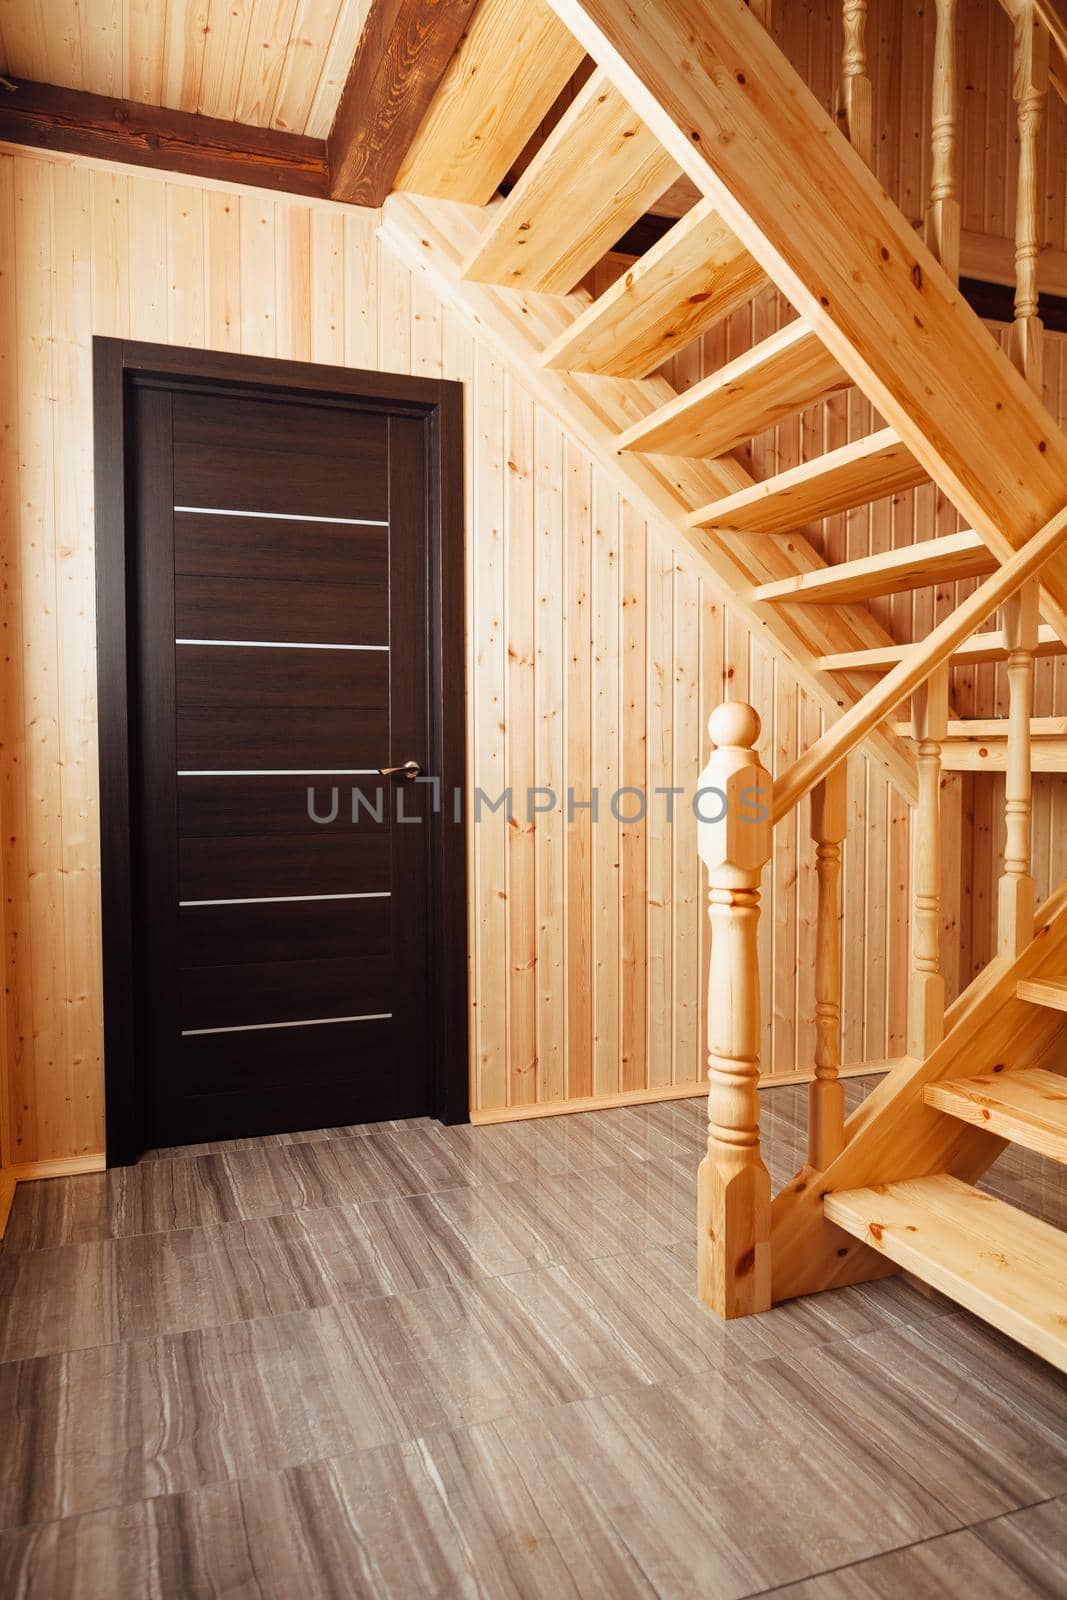 staircase and door inside of wooden house